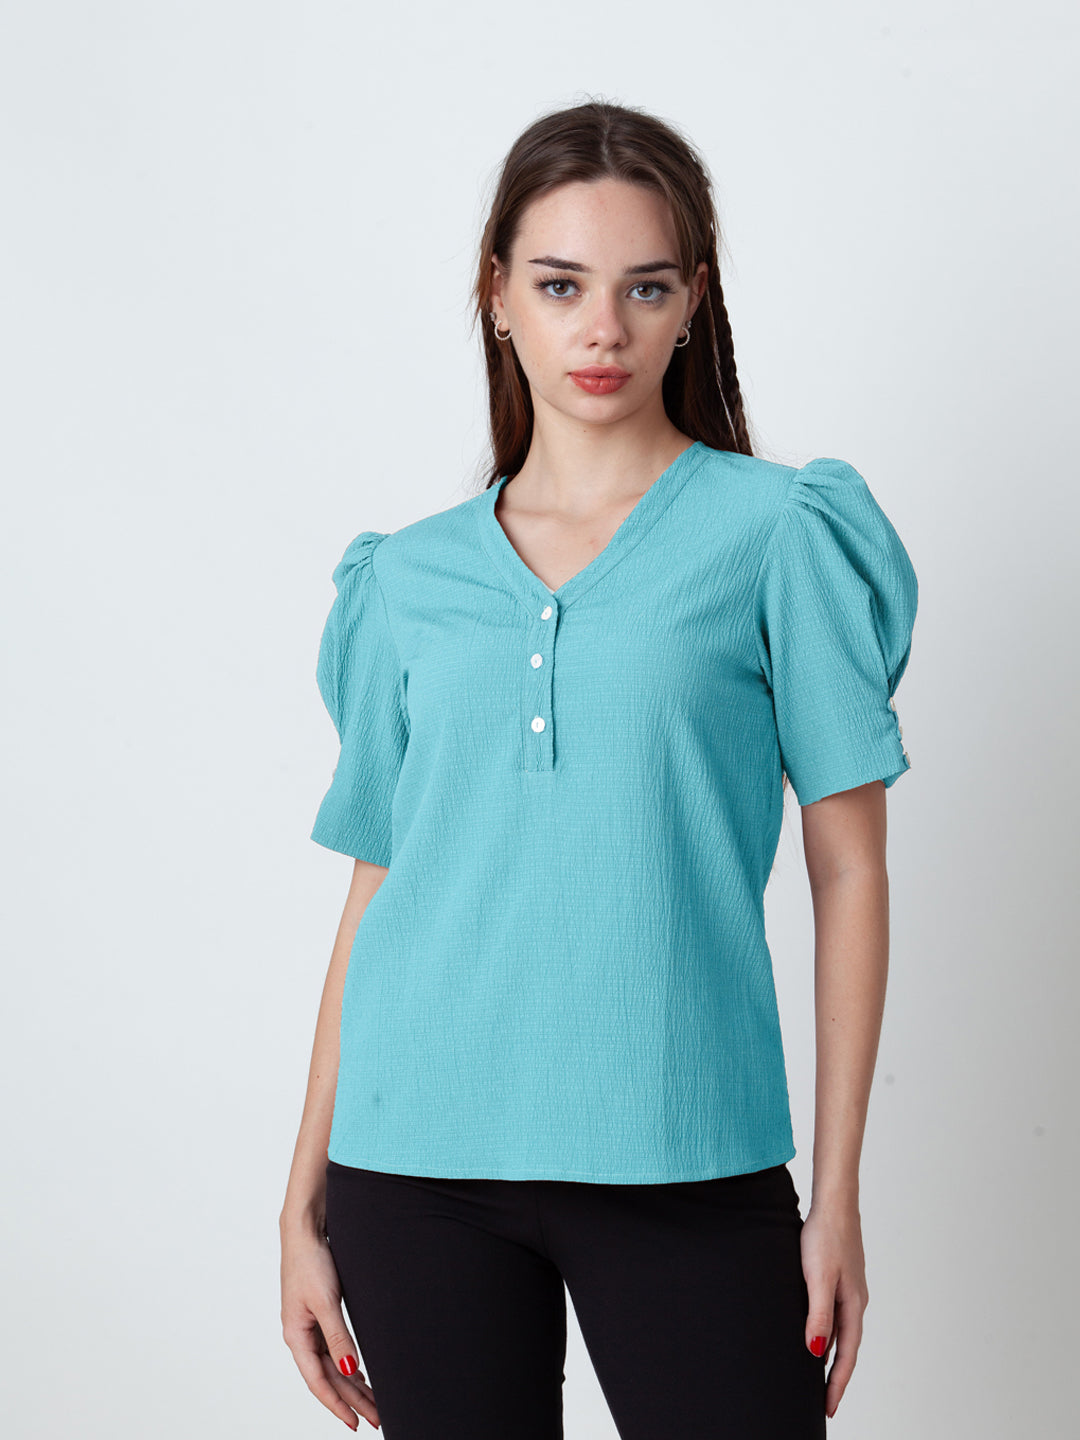 Solid-Puff-Sleeve-Top-VT09025-307-GlacialBlue-2